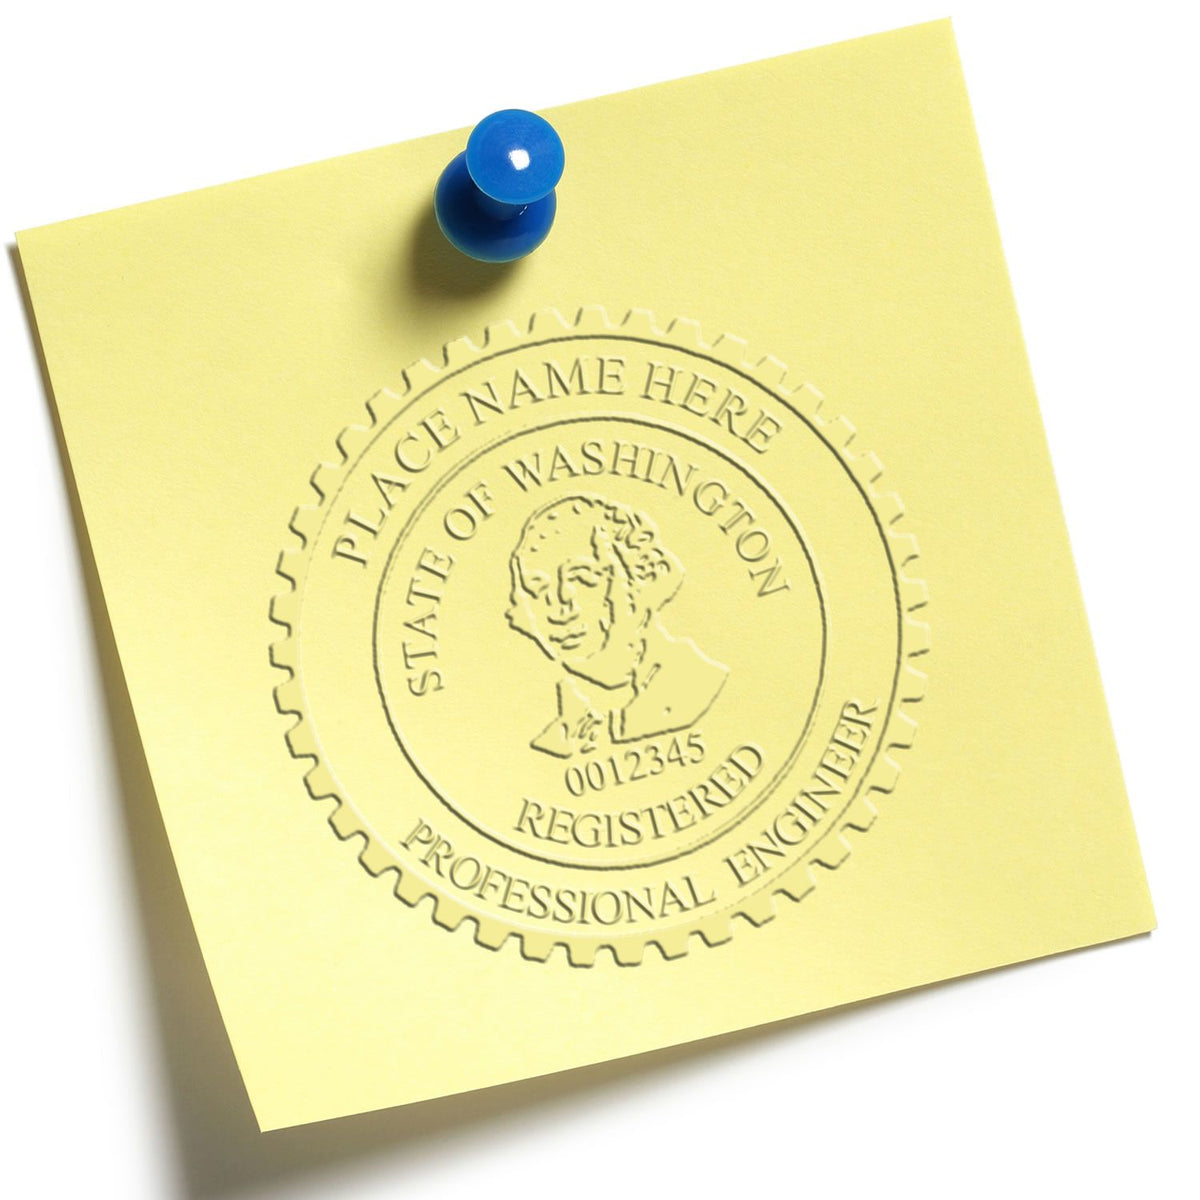 An alternative view of the Hybrid Washington Engineer Seal stamped on a sheet of paper showing the image in use